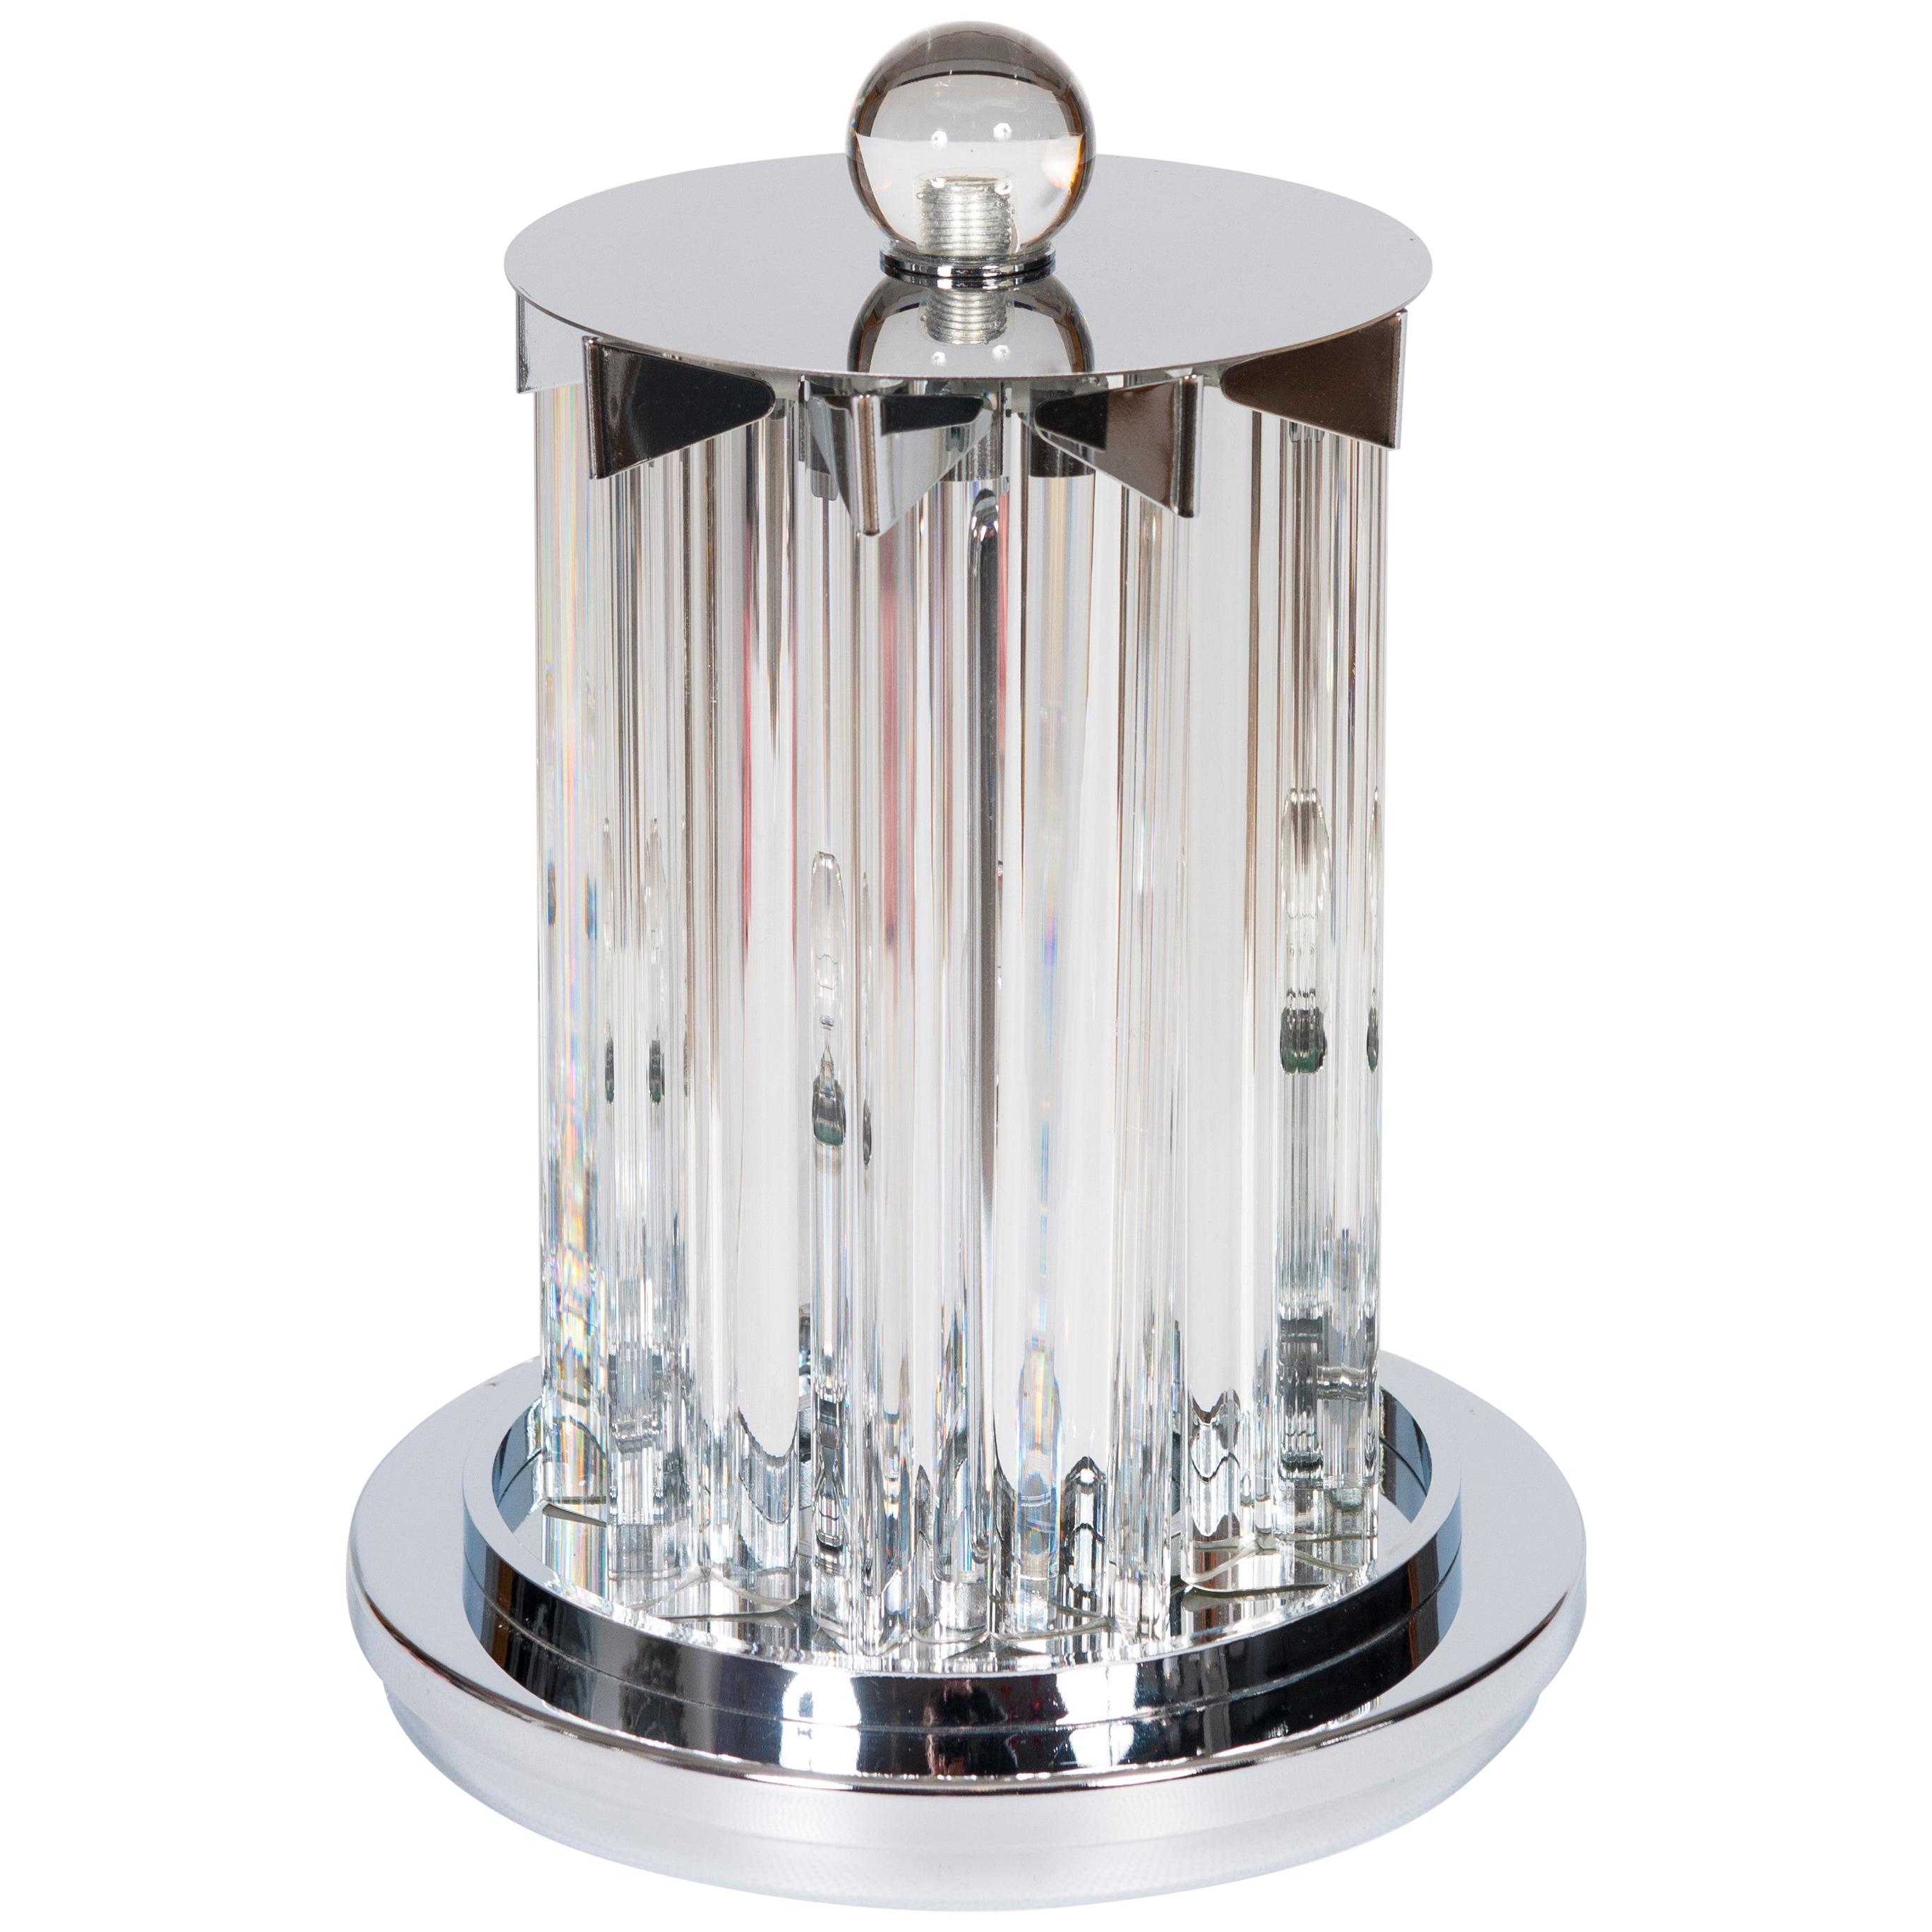 Pair of contemporary Murano glass table lamps, 21st century.
They are entirely hand crafted in blown Murano glass, and all the elements are clear color and accommodated in an handcrafted chromed framework. Each table lamp is composed by 9